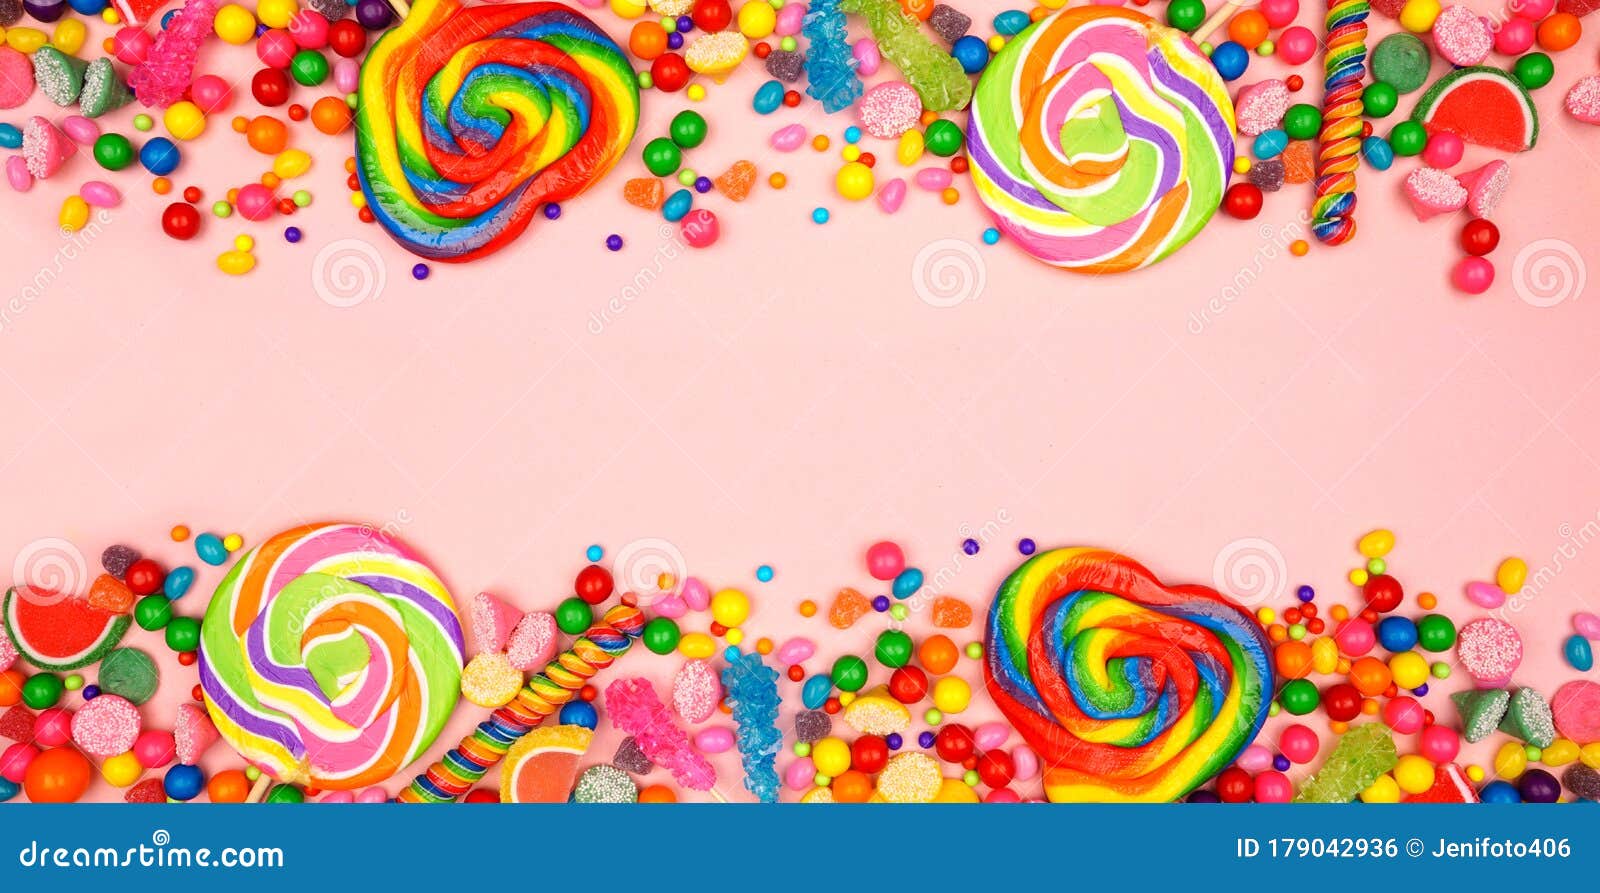 Colorful Assorted Candies, Overhead View Double Border with a Pink ...